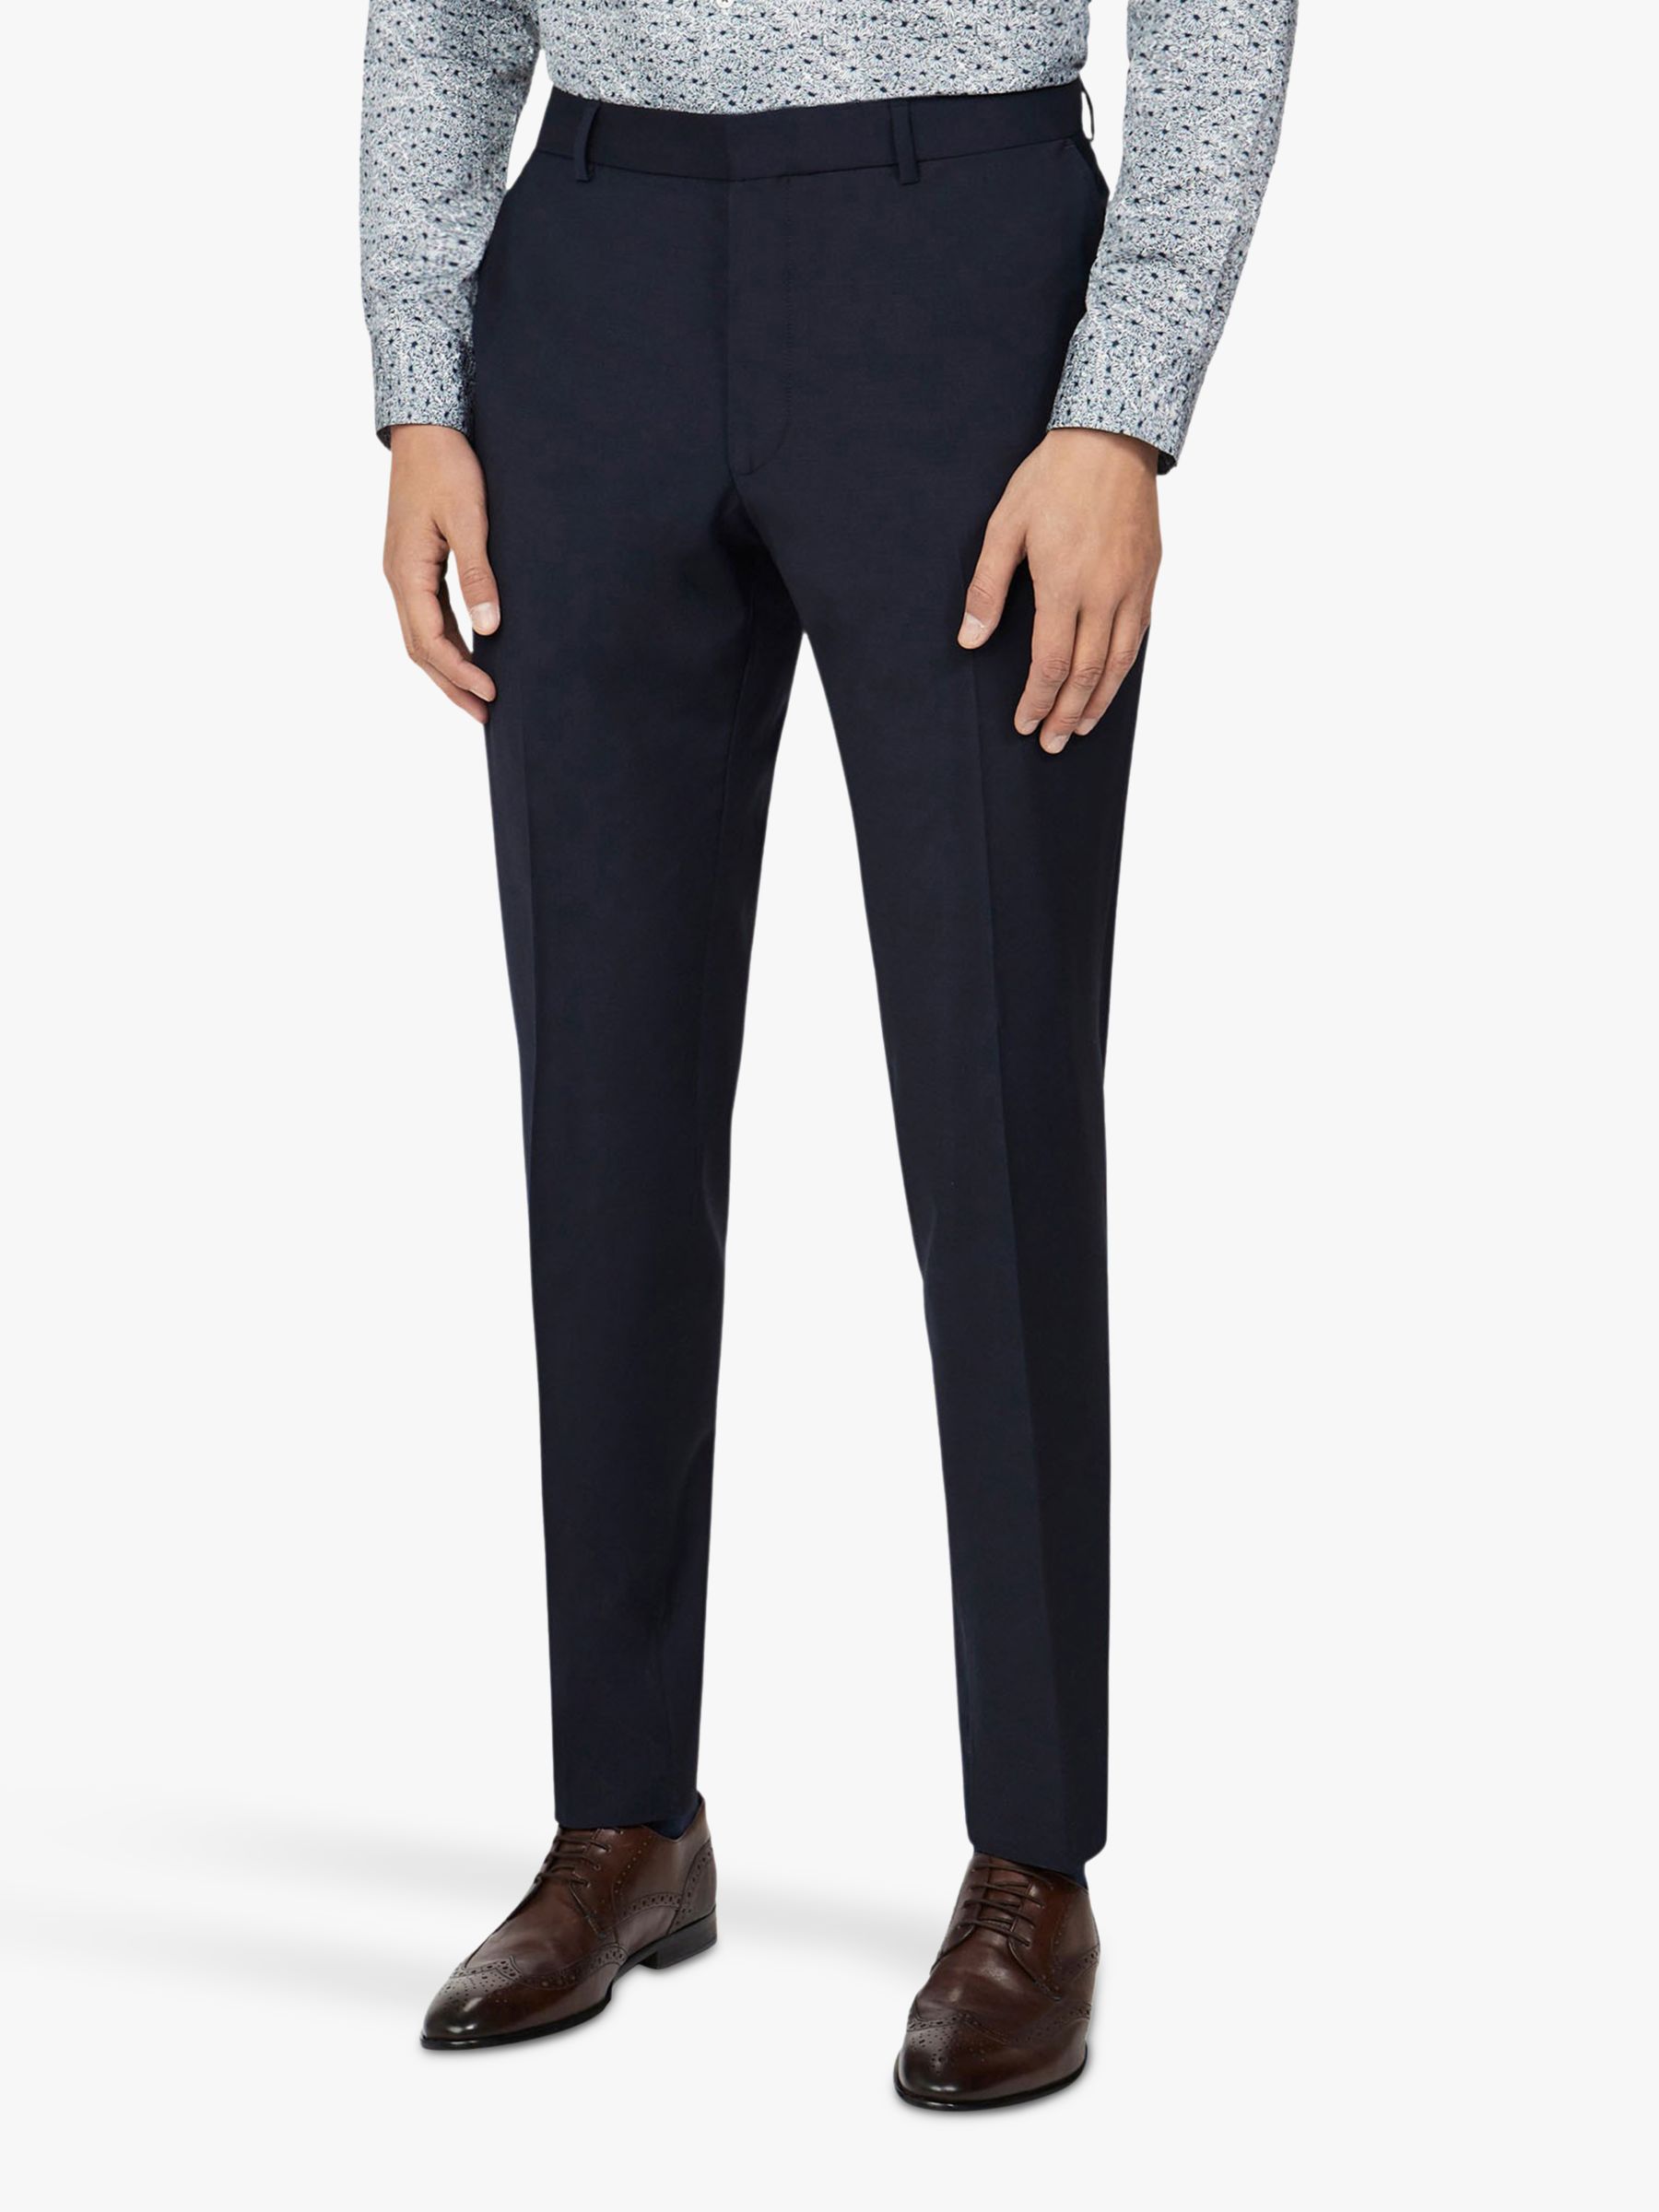 Buy Ted Baker Panama Wool Blend Suit Trousers Online at johnlewis.com